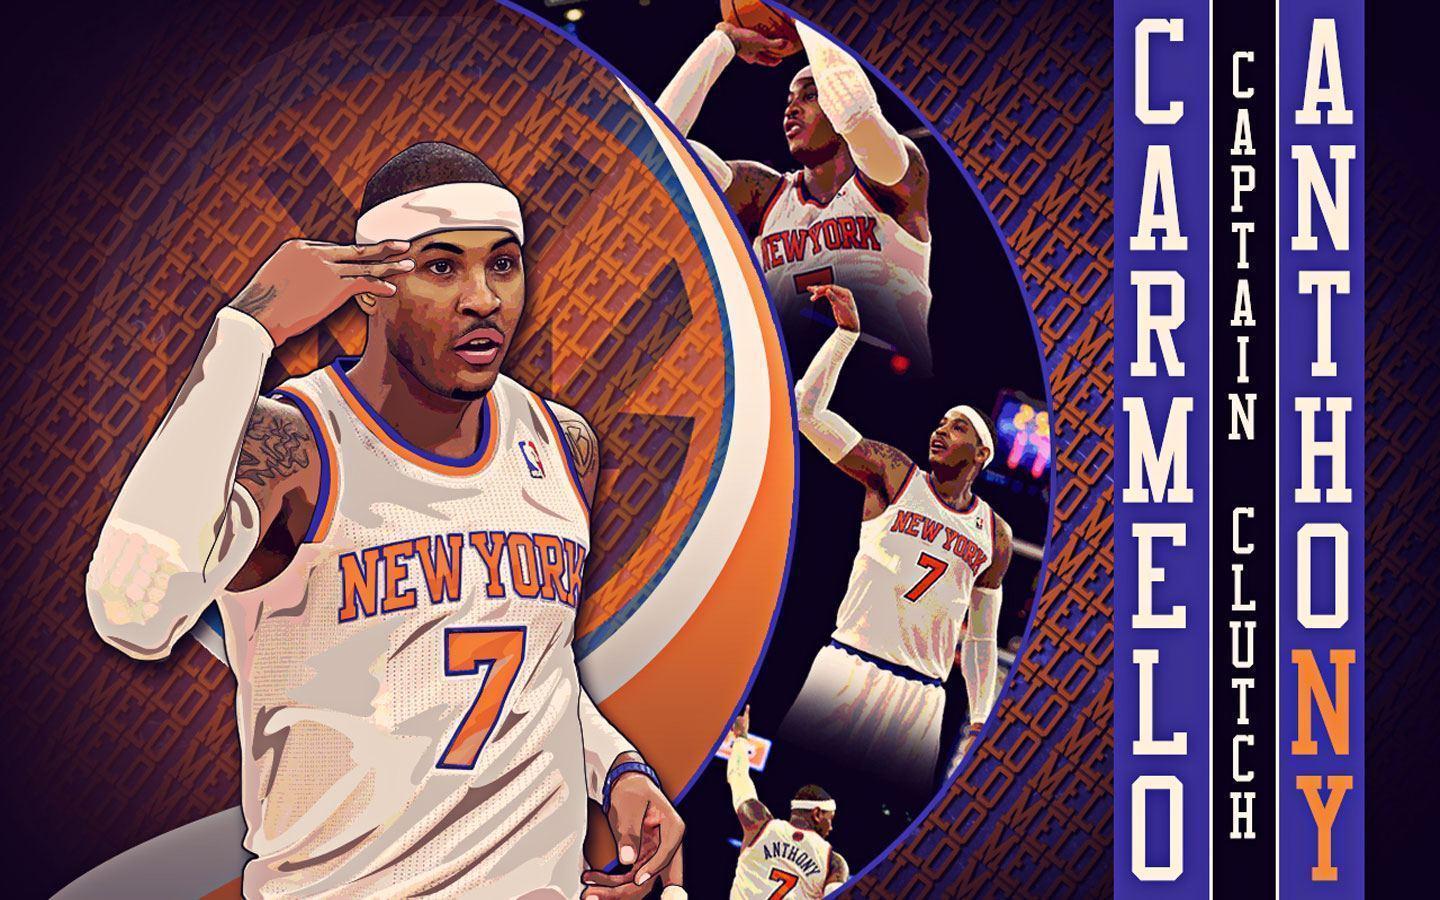 Carmelo Anthony wallpaper HD free download